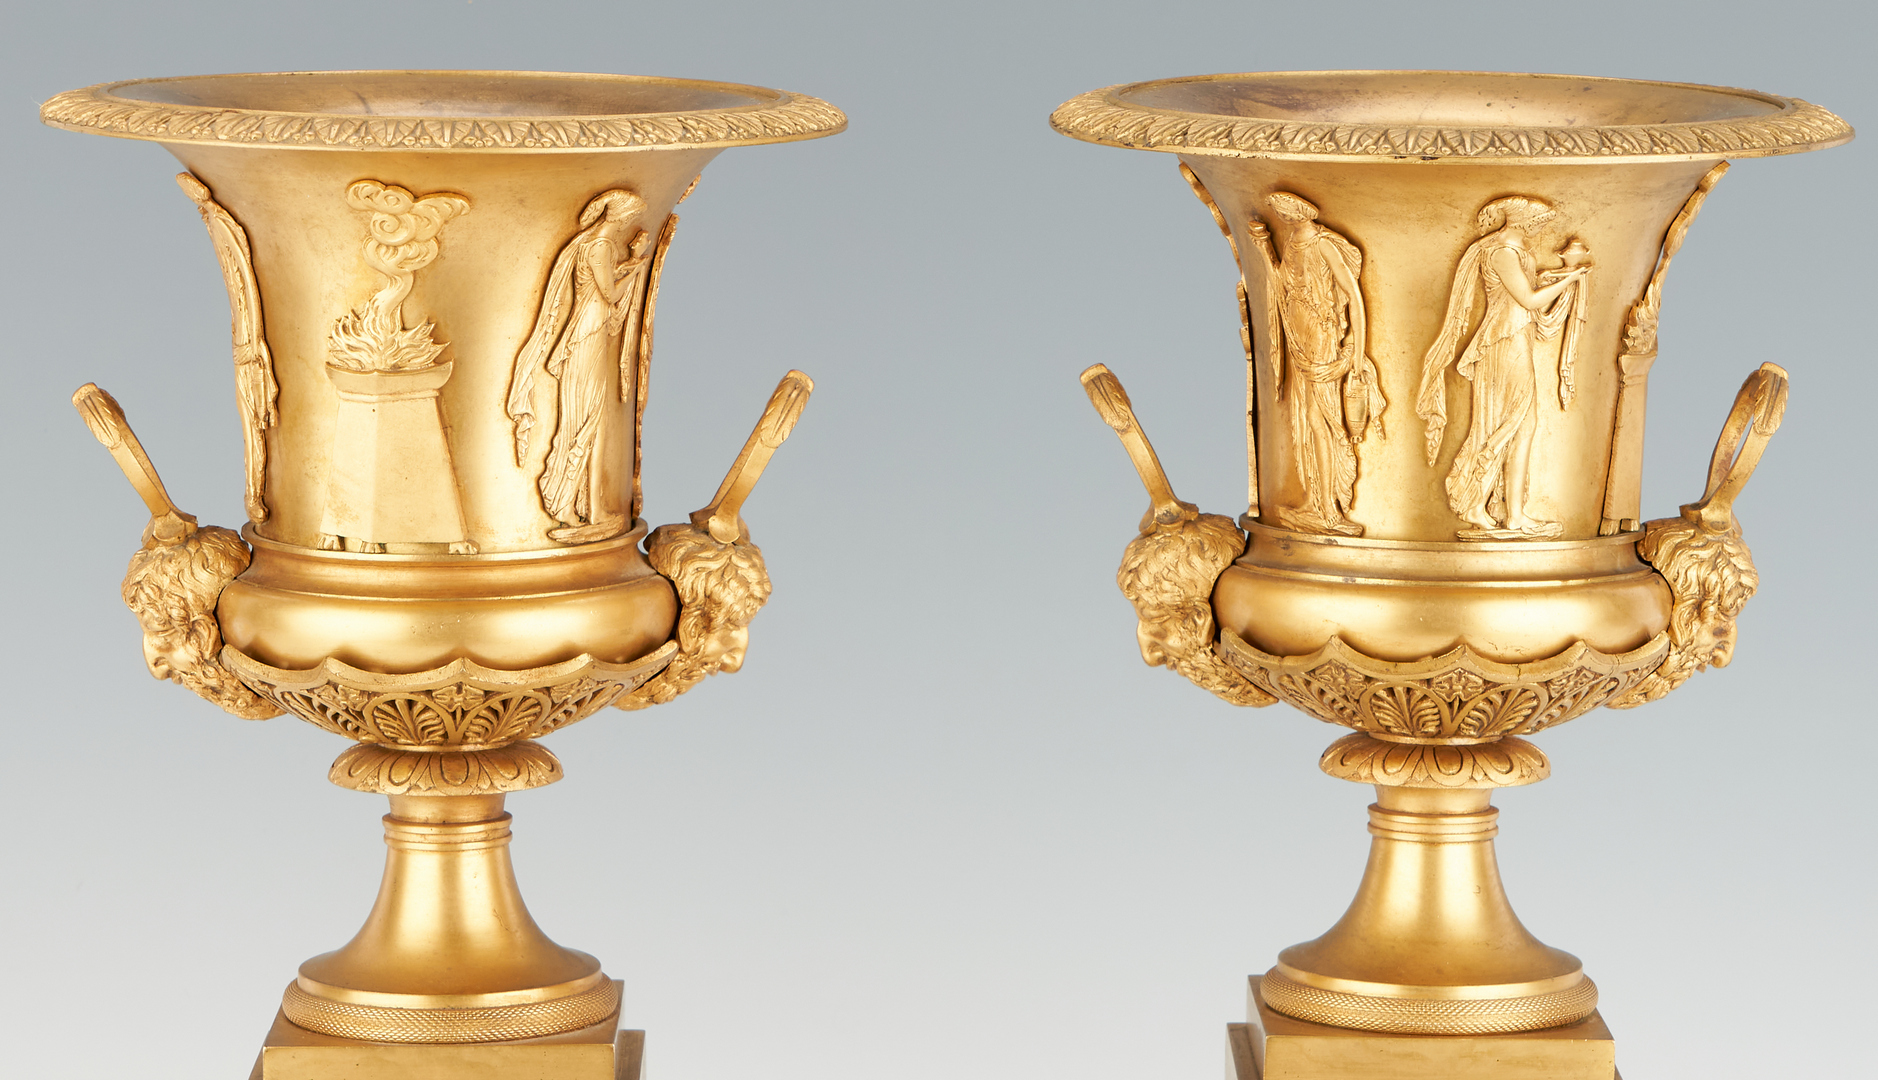 Lot 126: Pair Neoclassical or Empire Style Gilt Bronze Urns